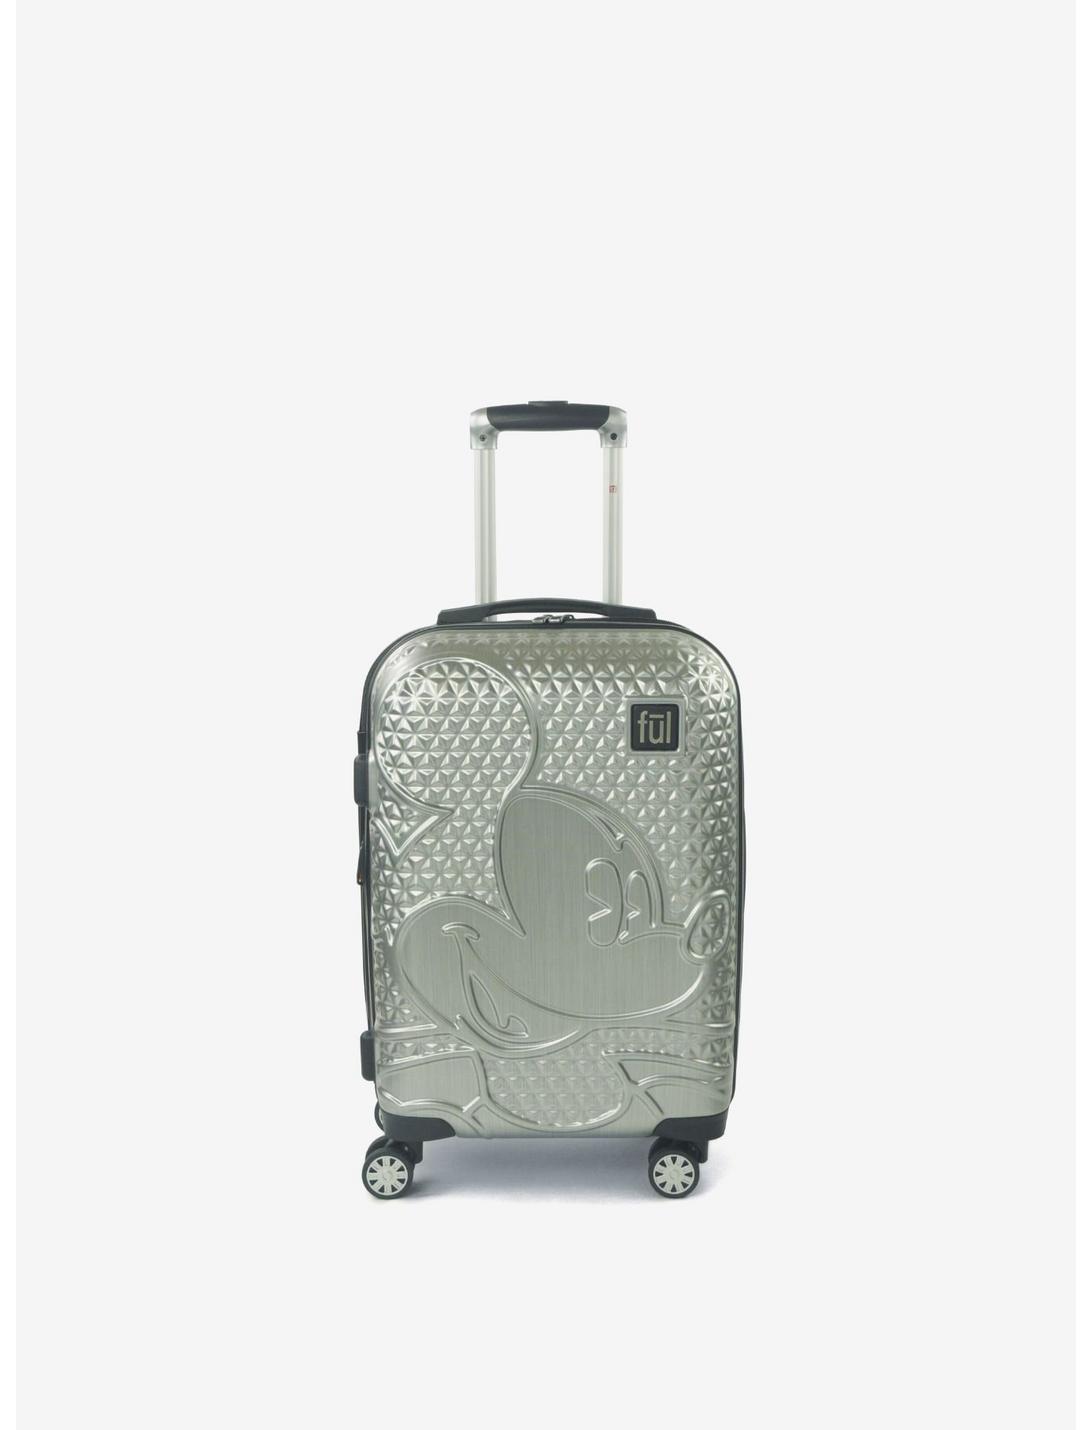 FUL Disney Mickey Mouse Silver Textured 21 Inch Hardside Rolling Luggage, , hi-res